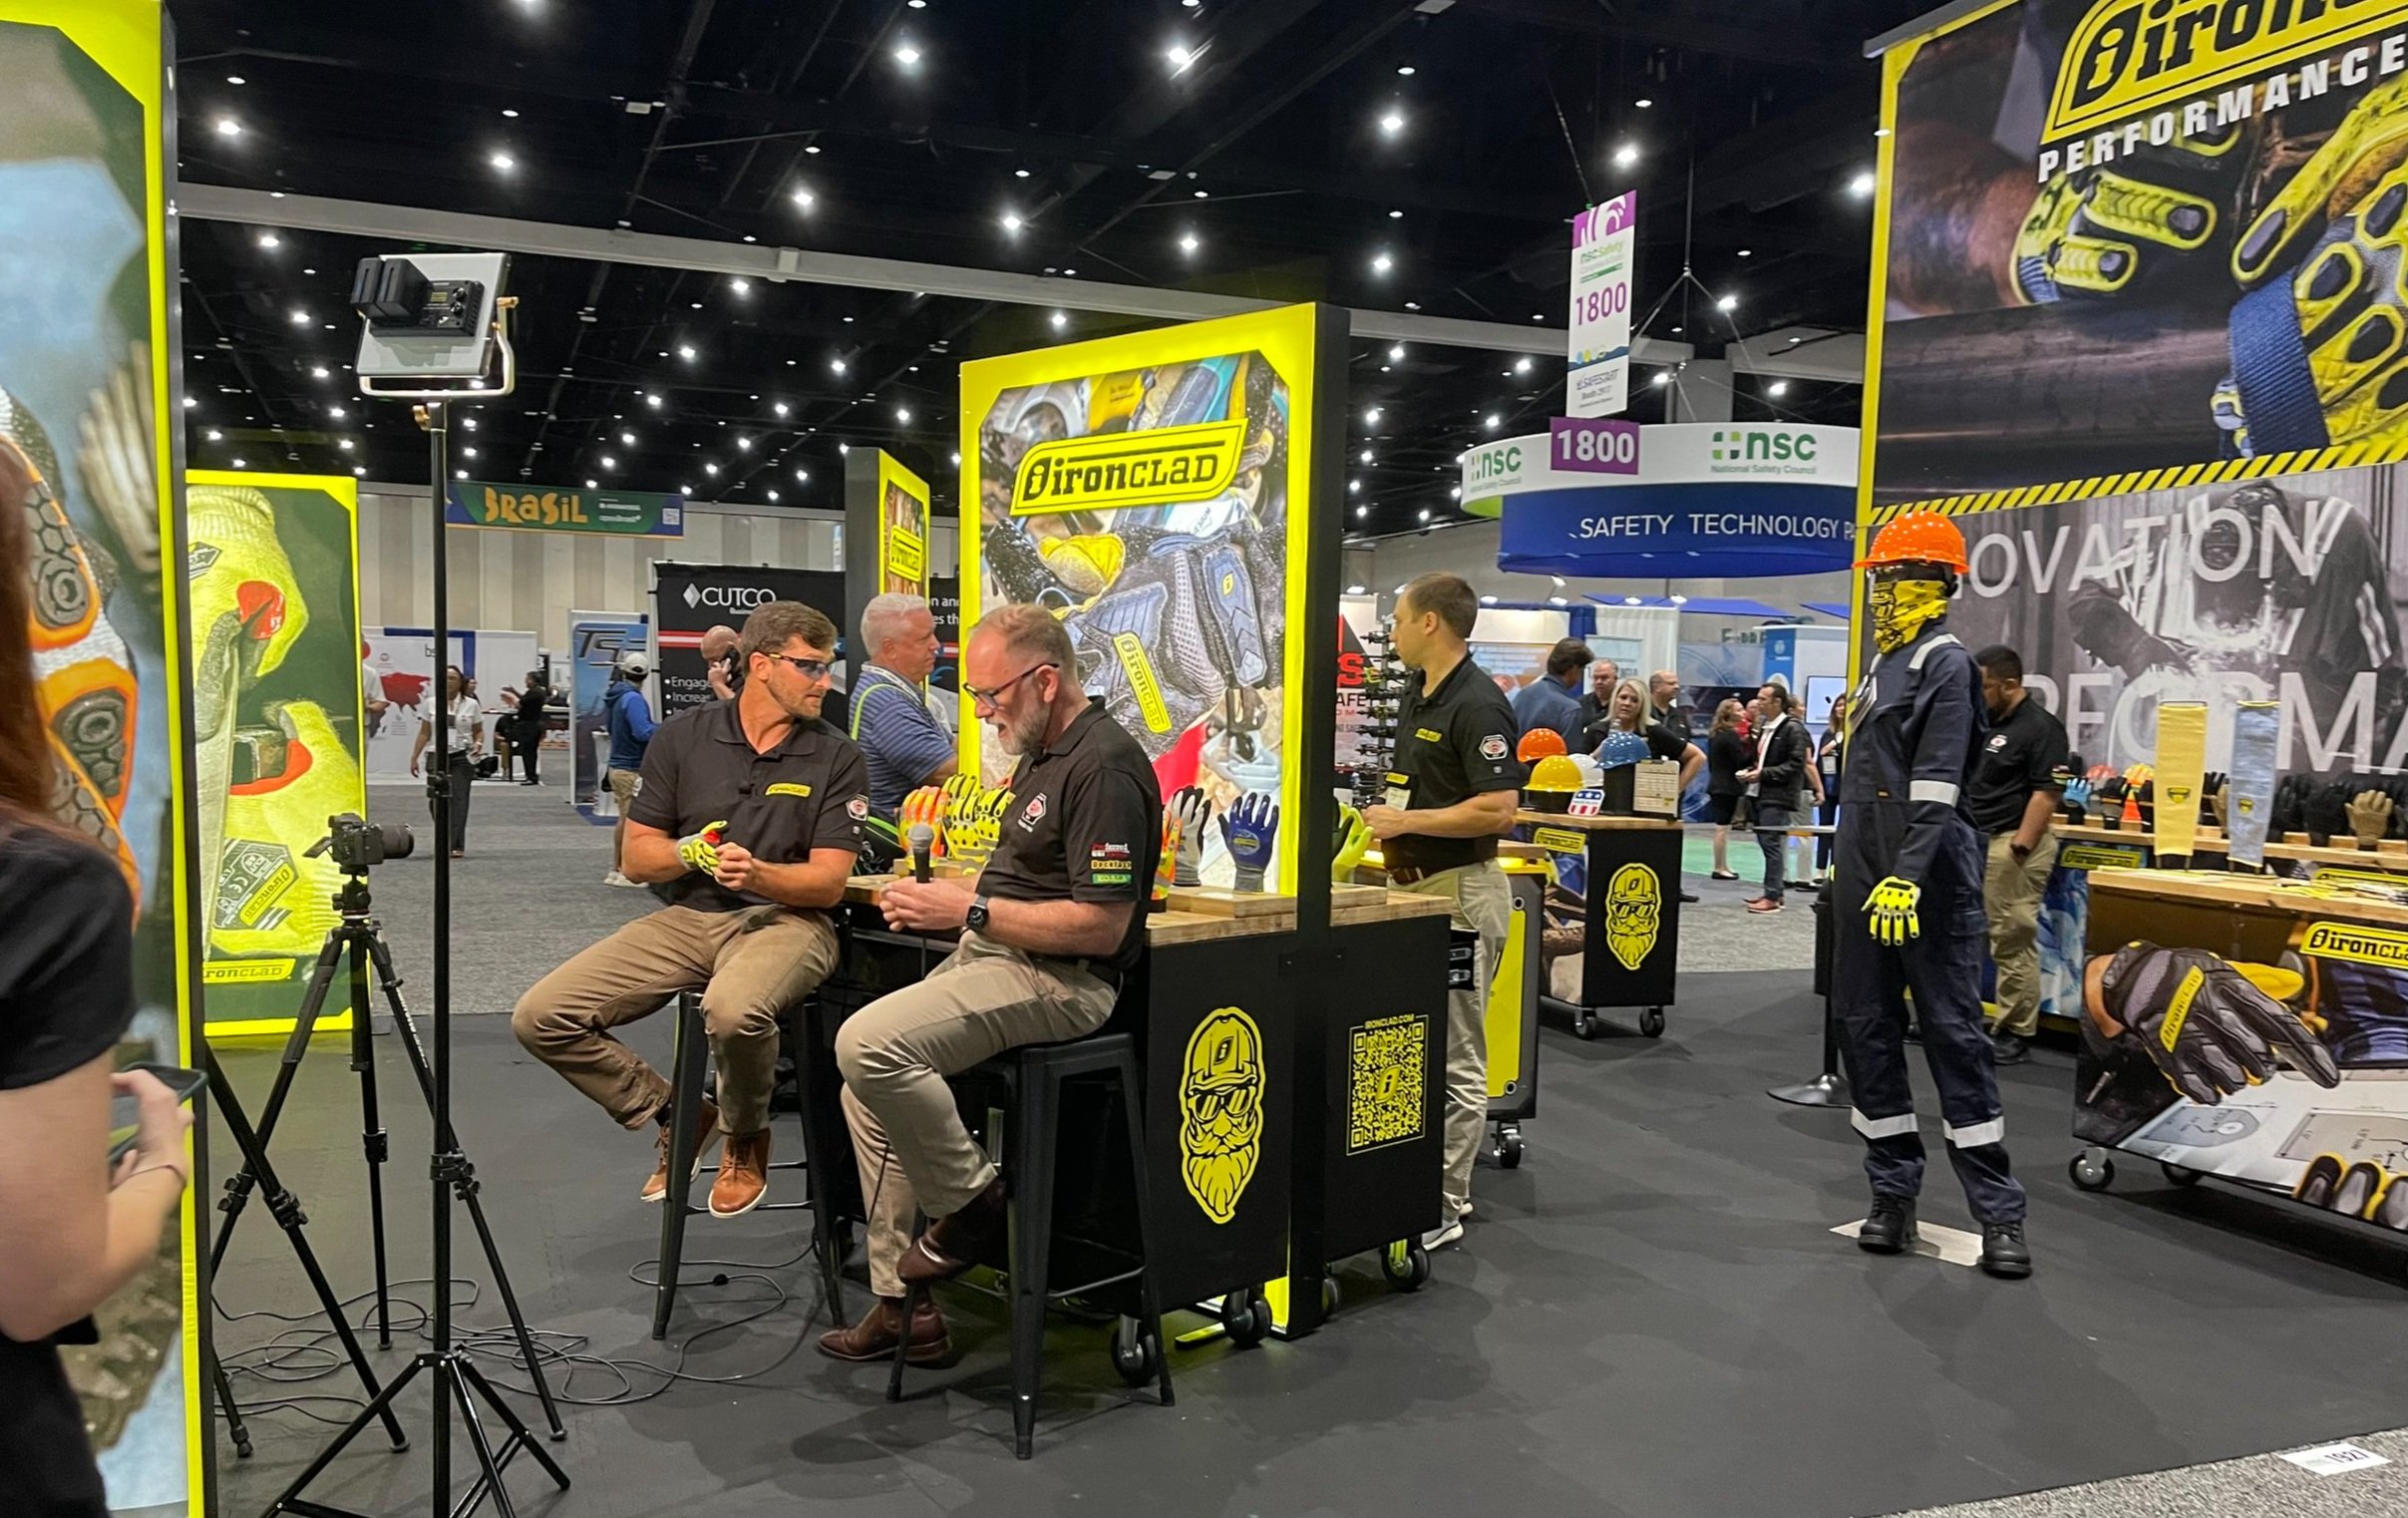 2022 nsc Safety Congress & Expo — OneKey Supply